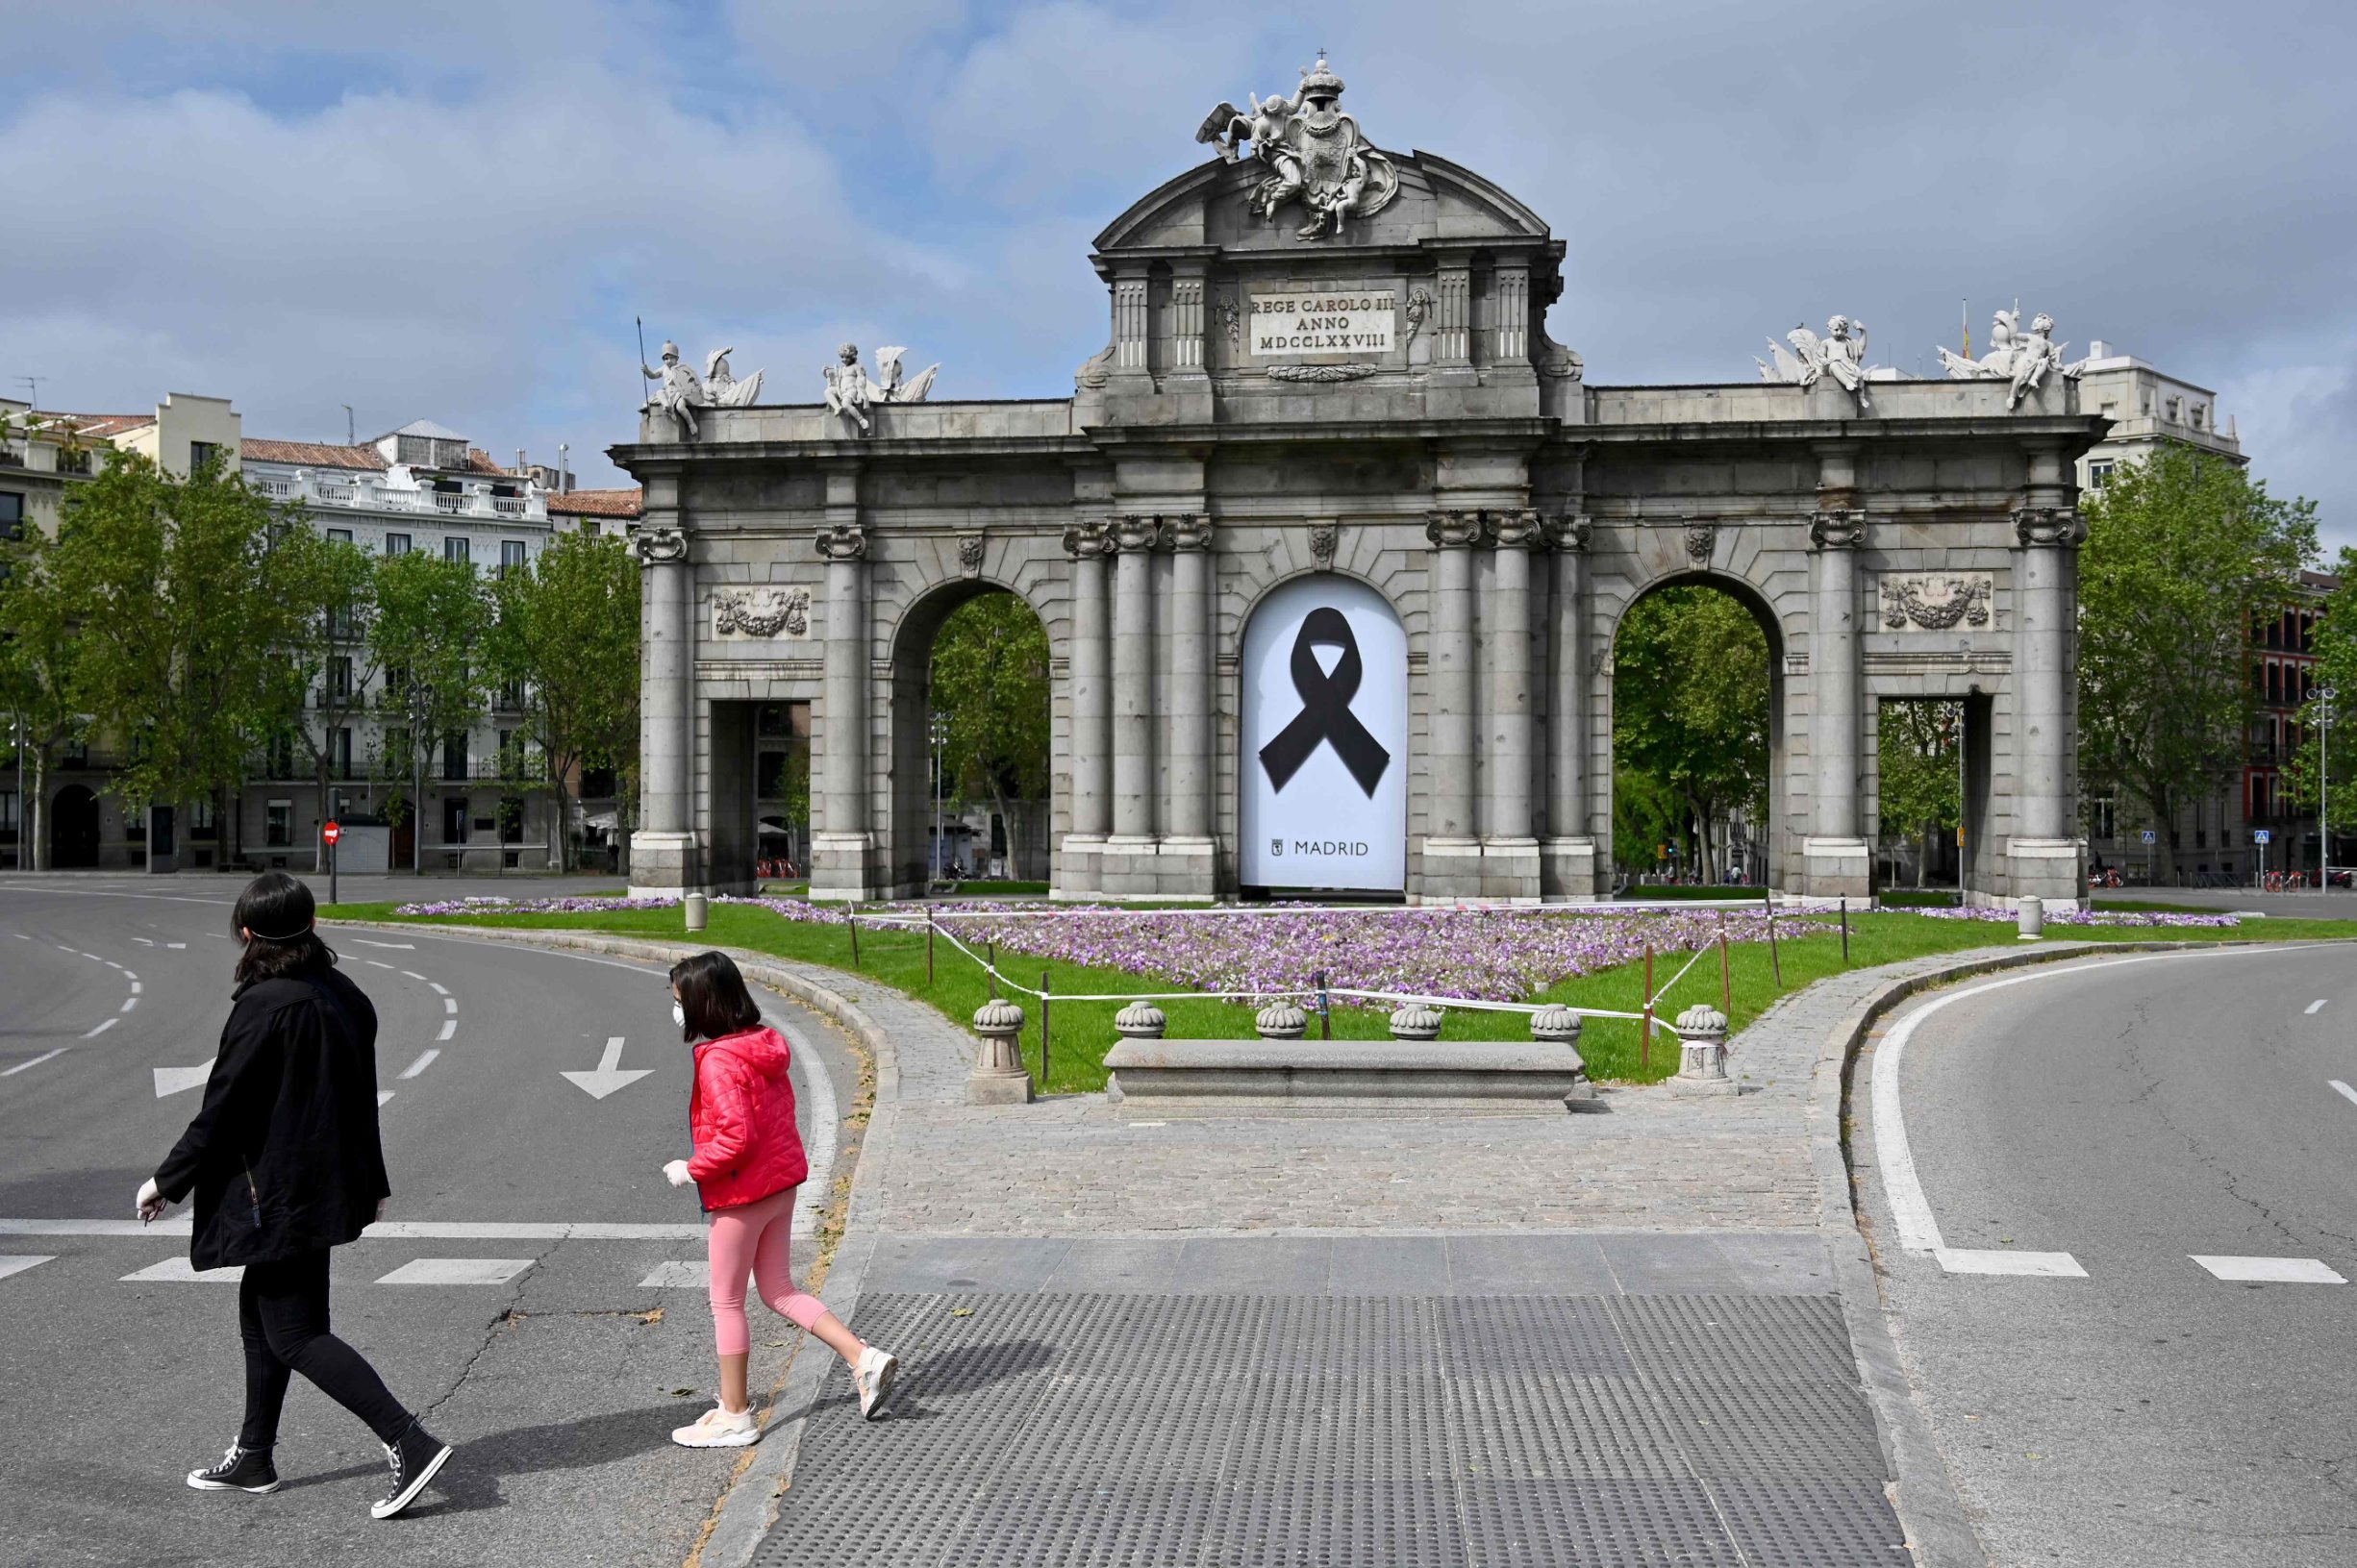 A woman walks with a young girl in front of the Puerta de Alcala monument in Madrid, on April 26, 2020 during a national lockdown to prevent the spread of the COVID-19 disease. - After six weeks stuck at home, Spain's children were being allowed out today to run, play or go for a walk as the government eased one of the world's toughest coronavirus lockdowns. Spain is one of the hardest hit countries, with a death toll running a more than 23,000 to put it behind only the United States and Italy despite stringent restrictions imposed from March 14, including keeping all children indoors. Today, with their scooters, tricycles or in prams, the children accompanied by their parents came out onto largely deserted streets. (Photo by Gabriel BOUYS / AFP)